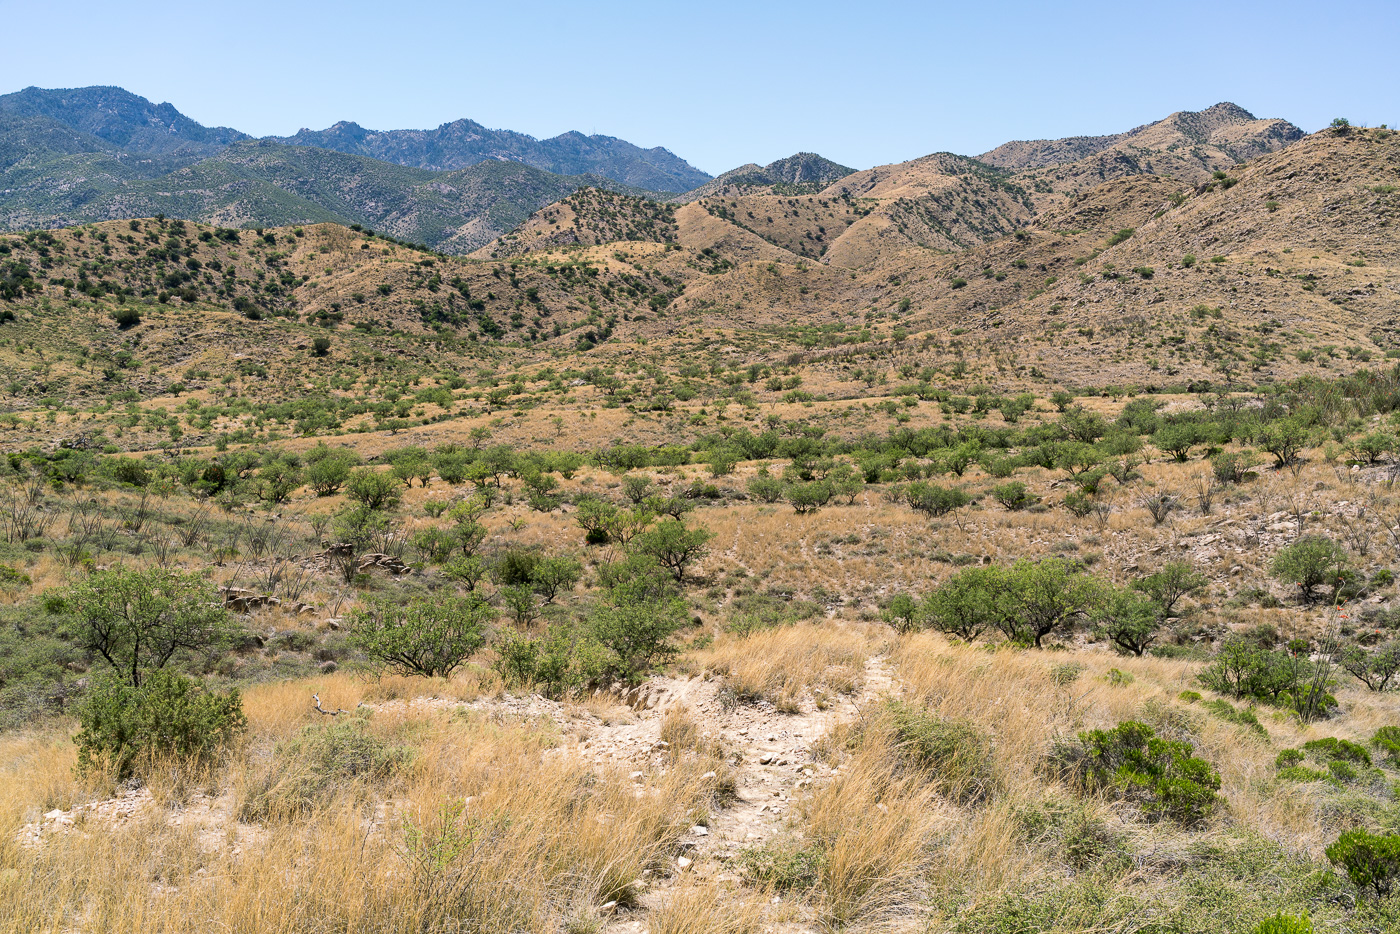 Mesquite Flat, North of the Brush Corral Trailhead. April 2017.